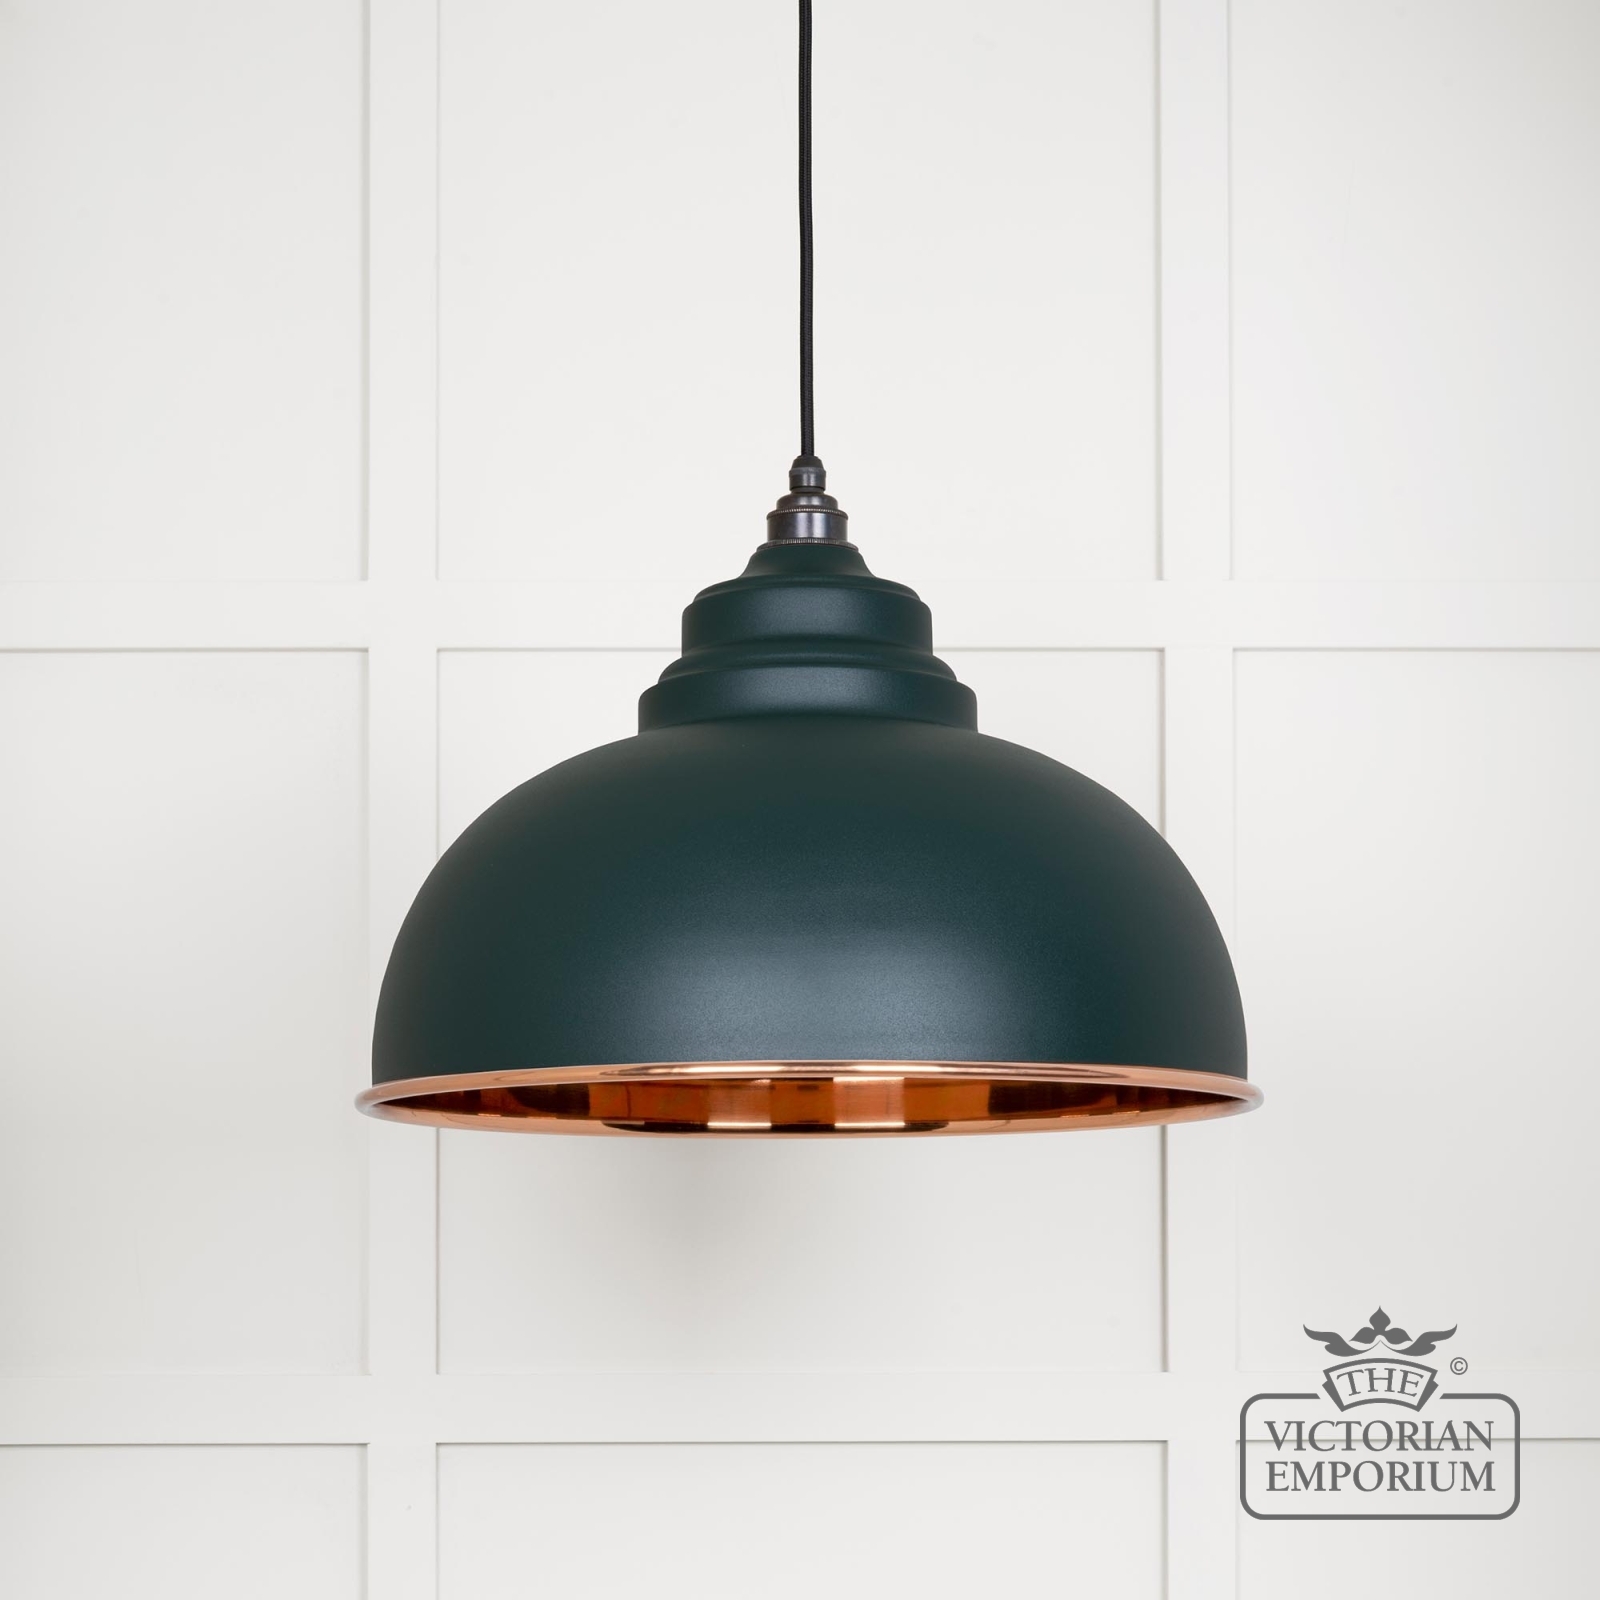 Harlow Pendant Light in Smooth Copper with Dingle Exterior